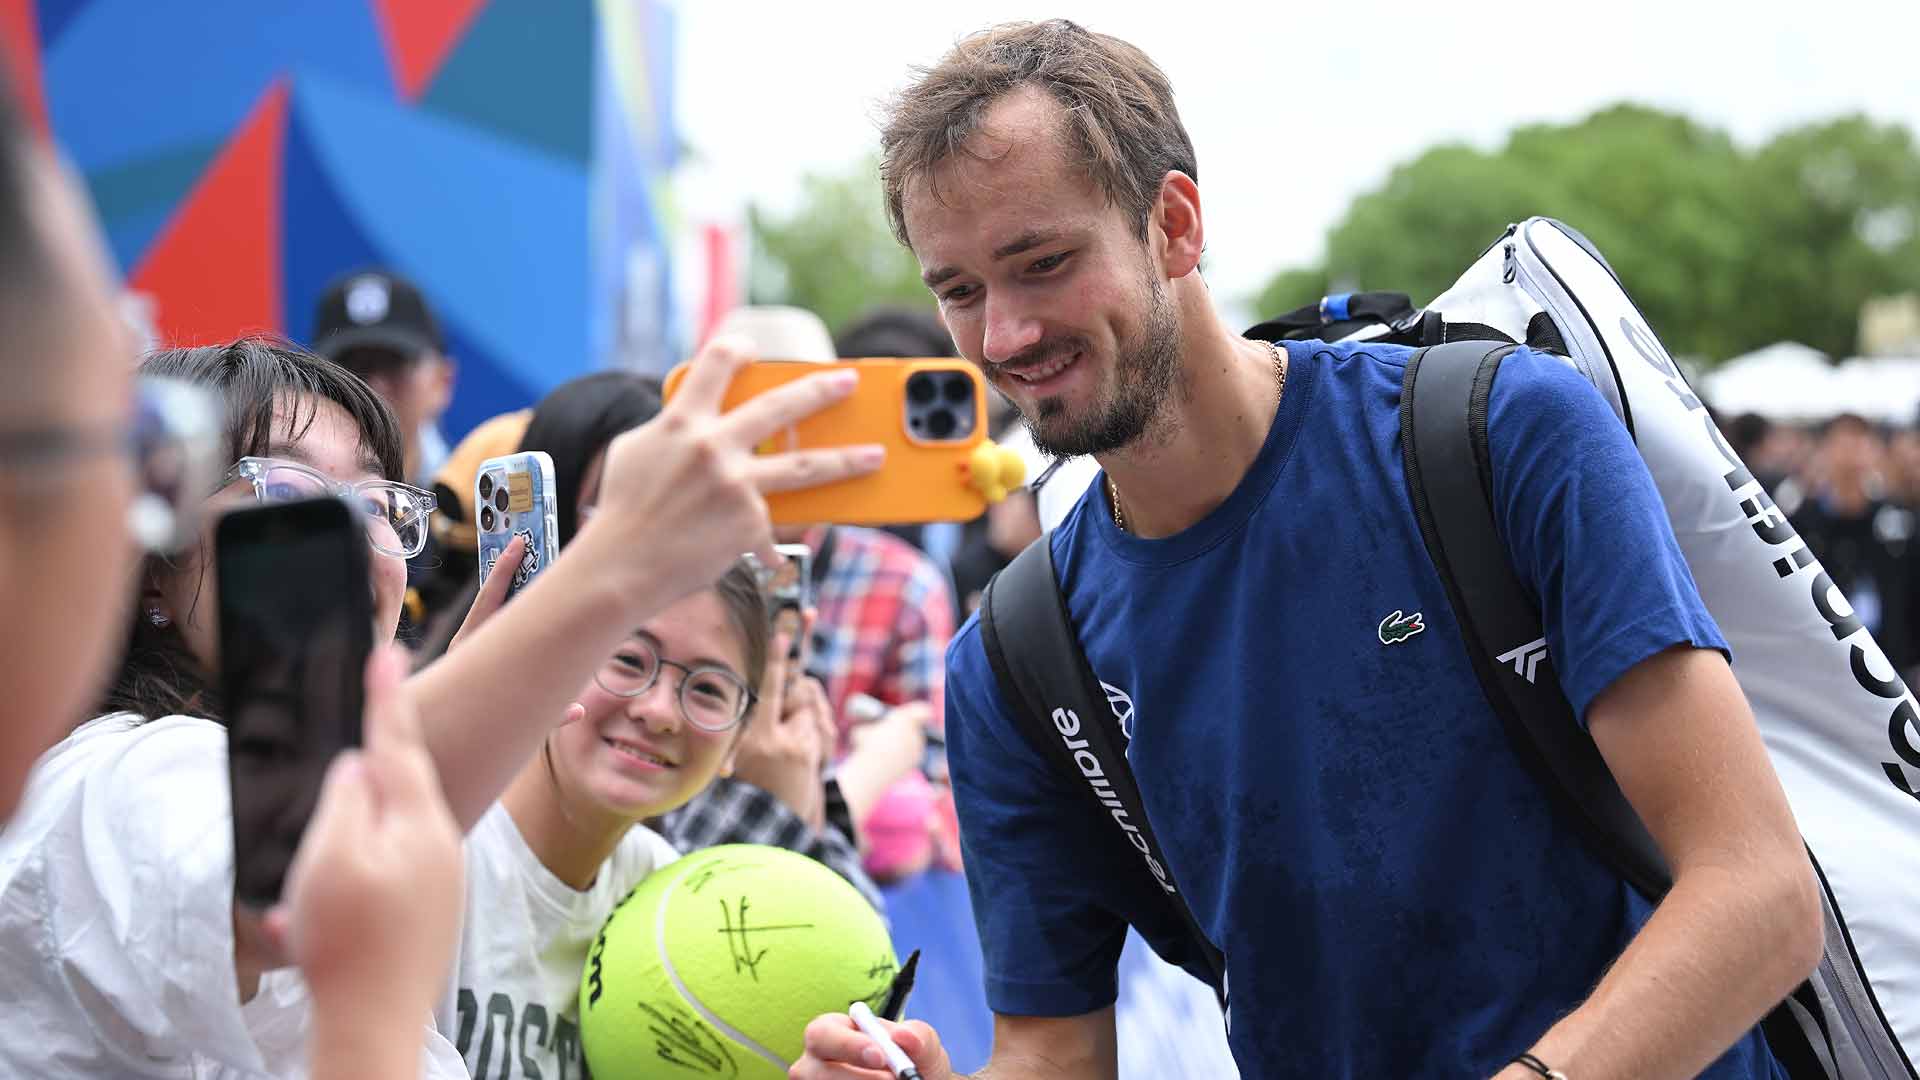 Daniil Medvedev greets fans Friday at the Rolex Shanghai Masters, where he lifted the title in 2019.